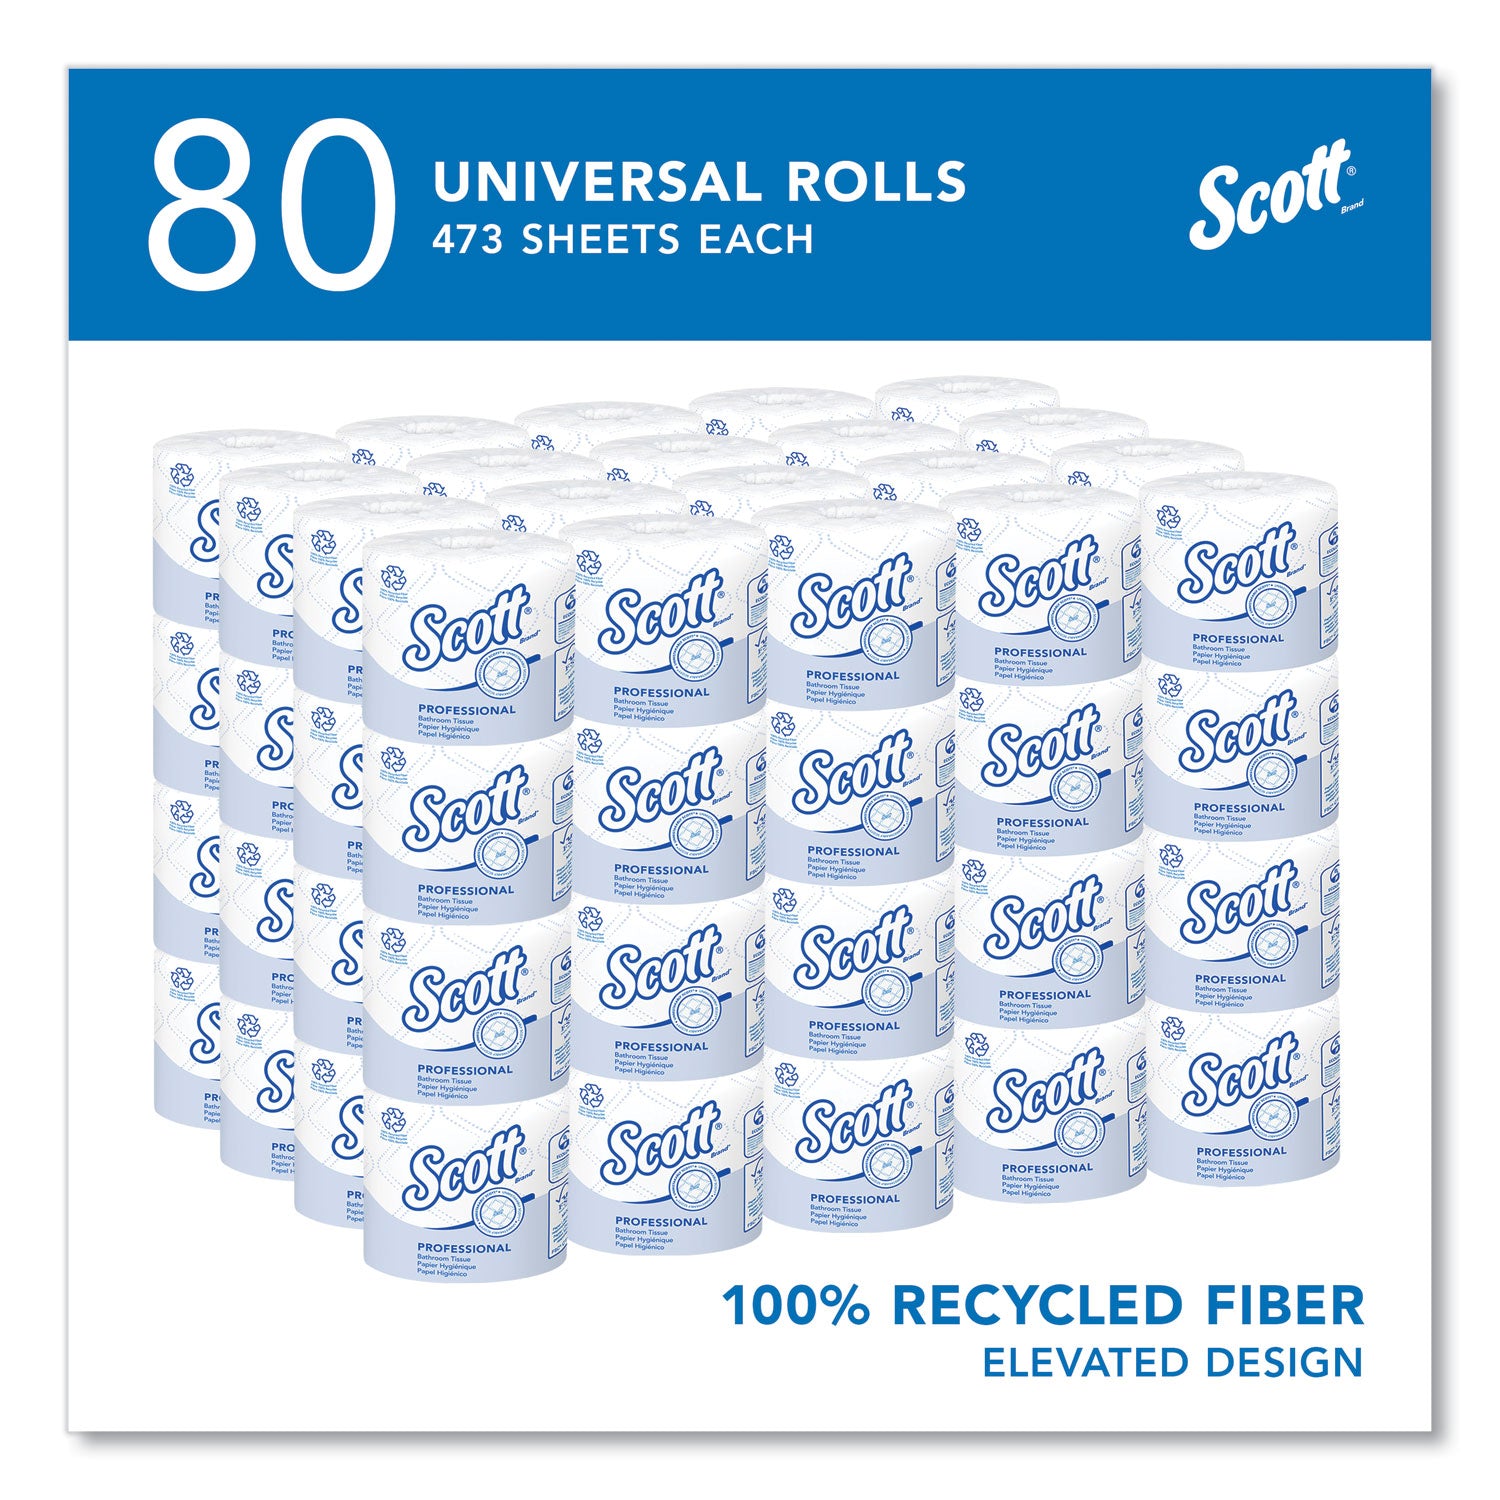 Essential 100% Recycled Fiber SRB Bathroom Tissue, Septic Safe, 2-Ply, White, 473 Sheets/Roll, 80 Rolls/Carton - 